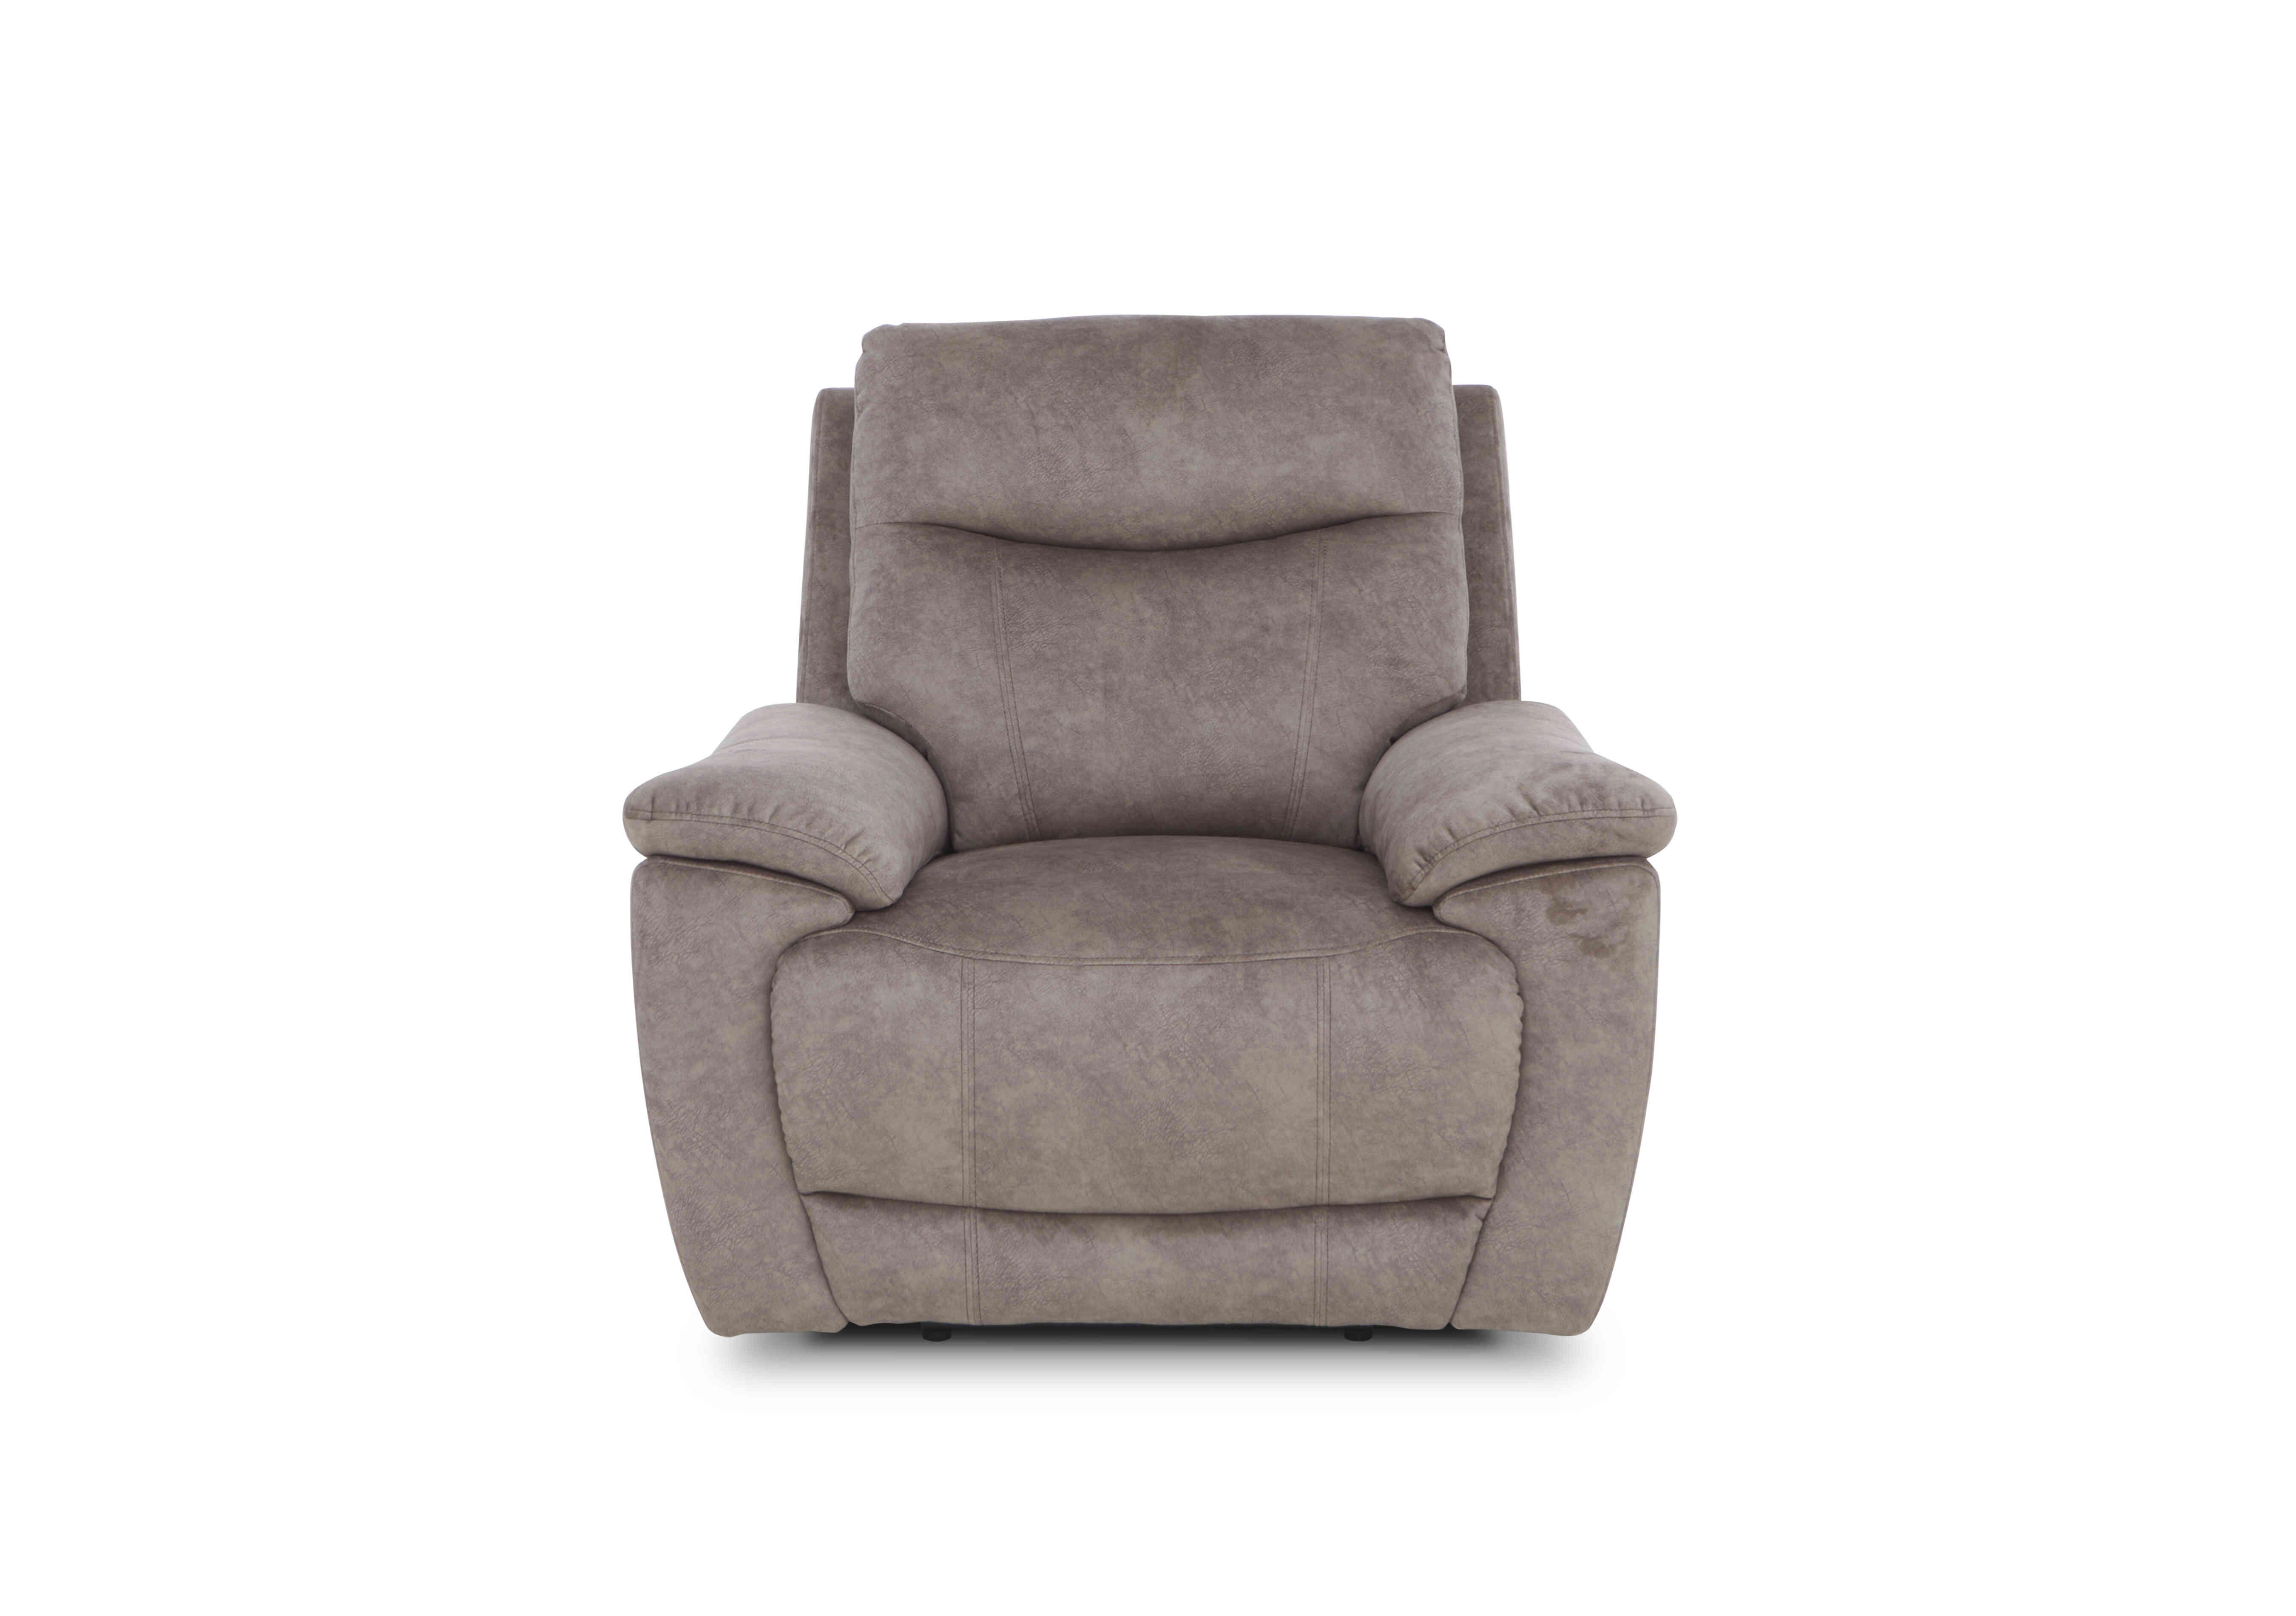 Sloane Fabric Chair in 18175 Marble Charcoal Grey on Furniture Village